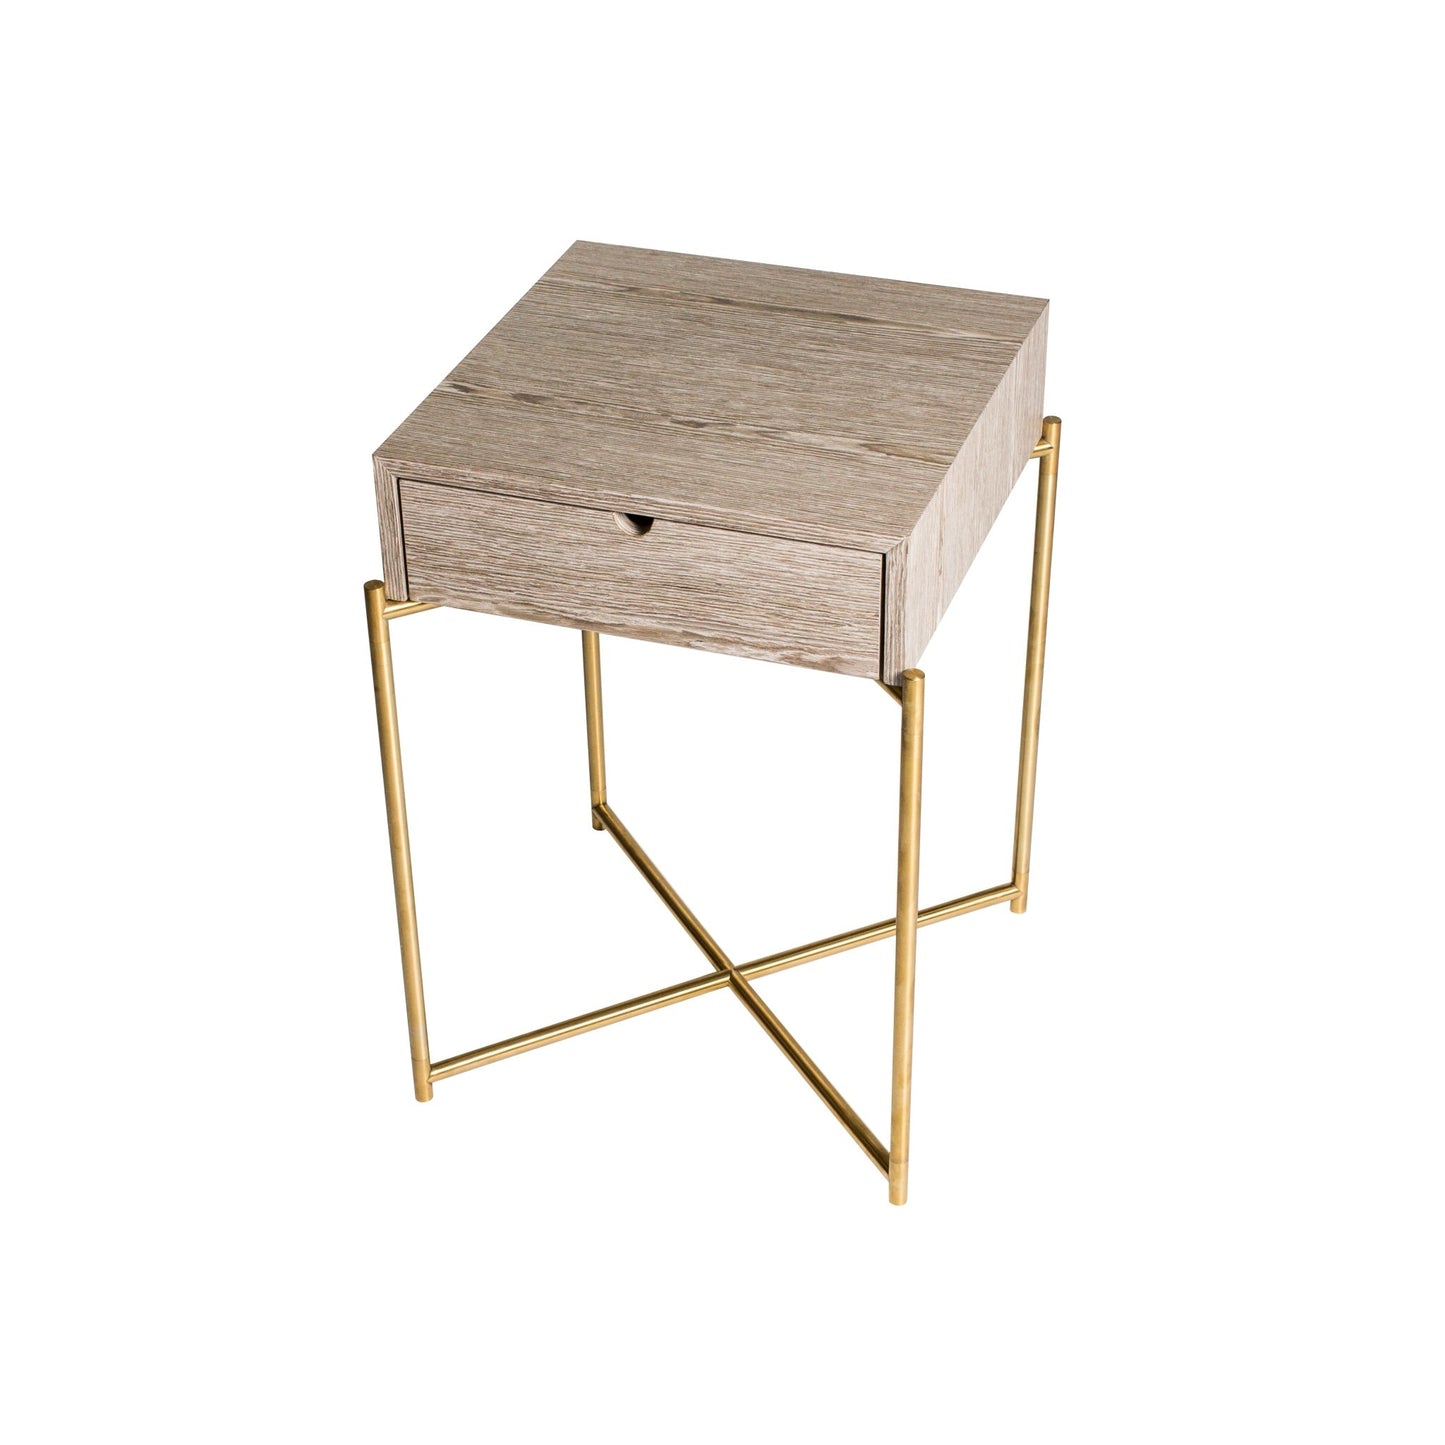 Iris Square Side Table With Drawer - Weathered Oak Drawer Top & Brass Frame